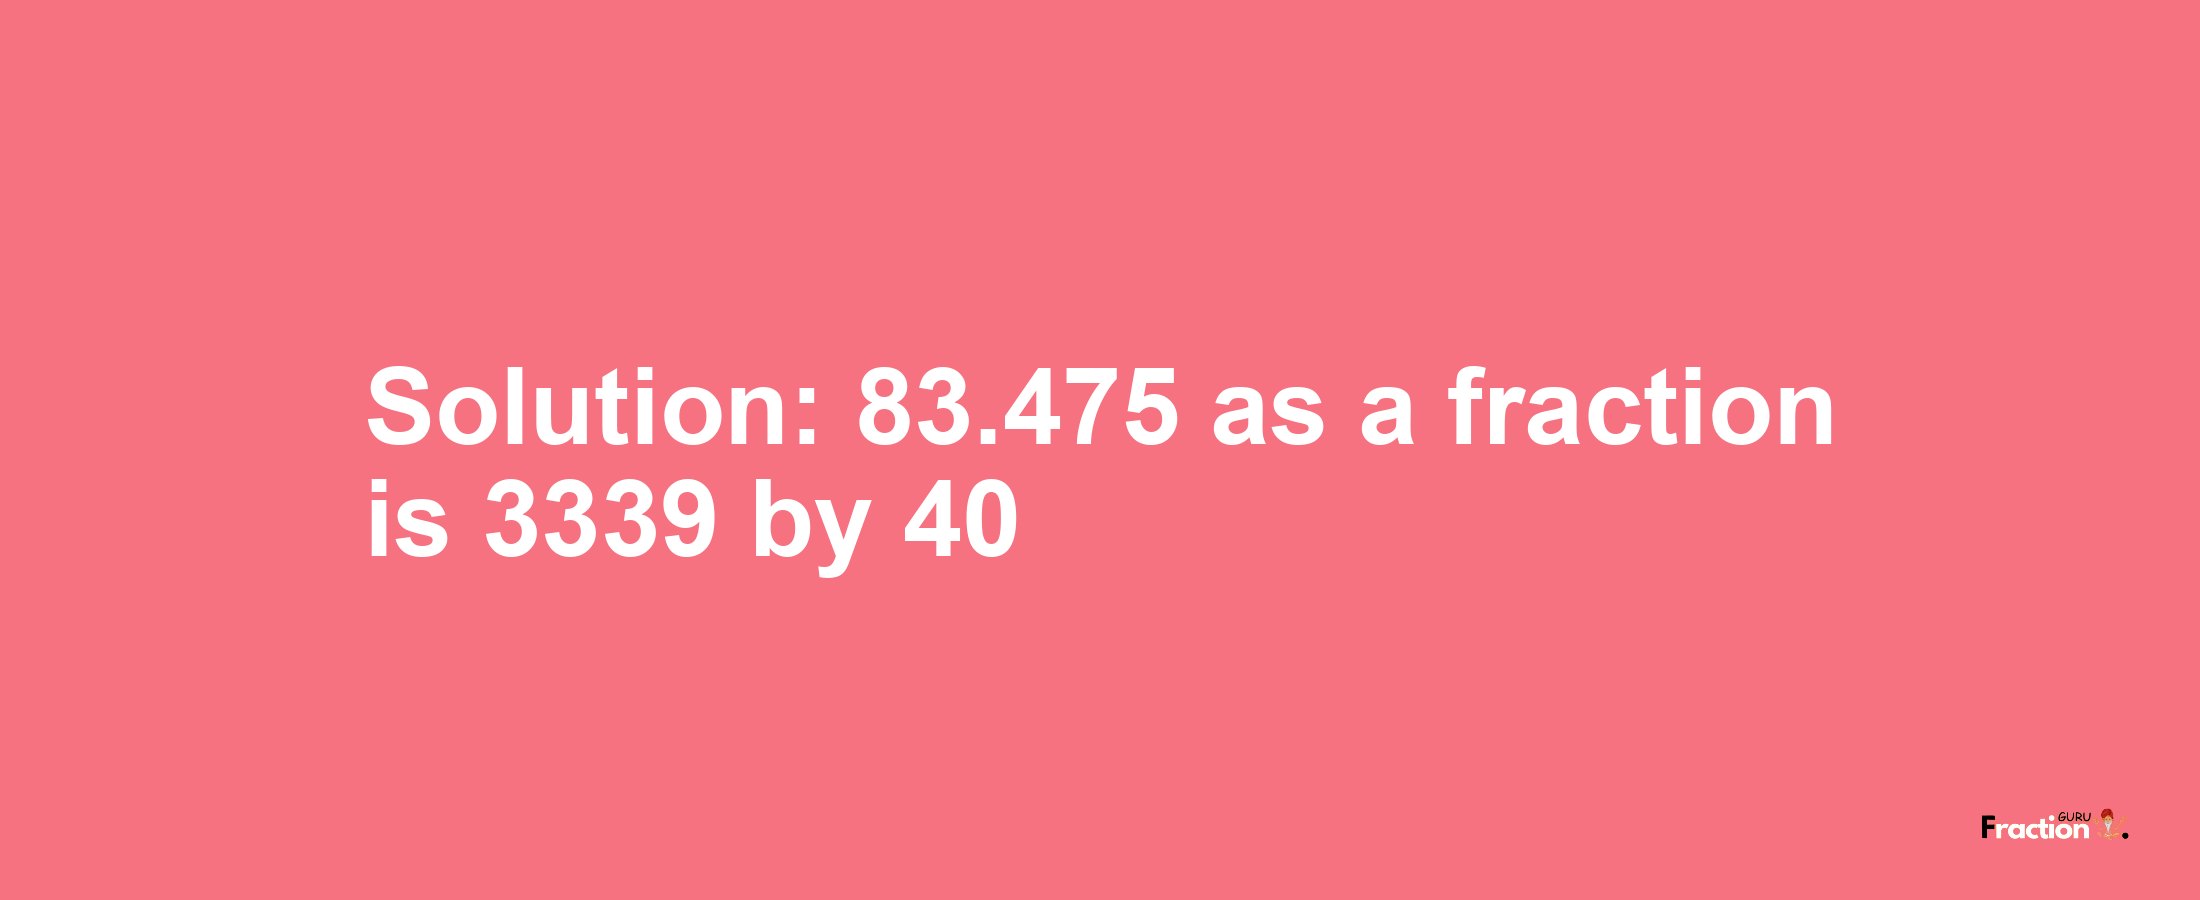 Solution:83.475 as a fraction is 3339/40